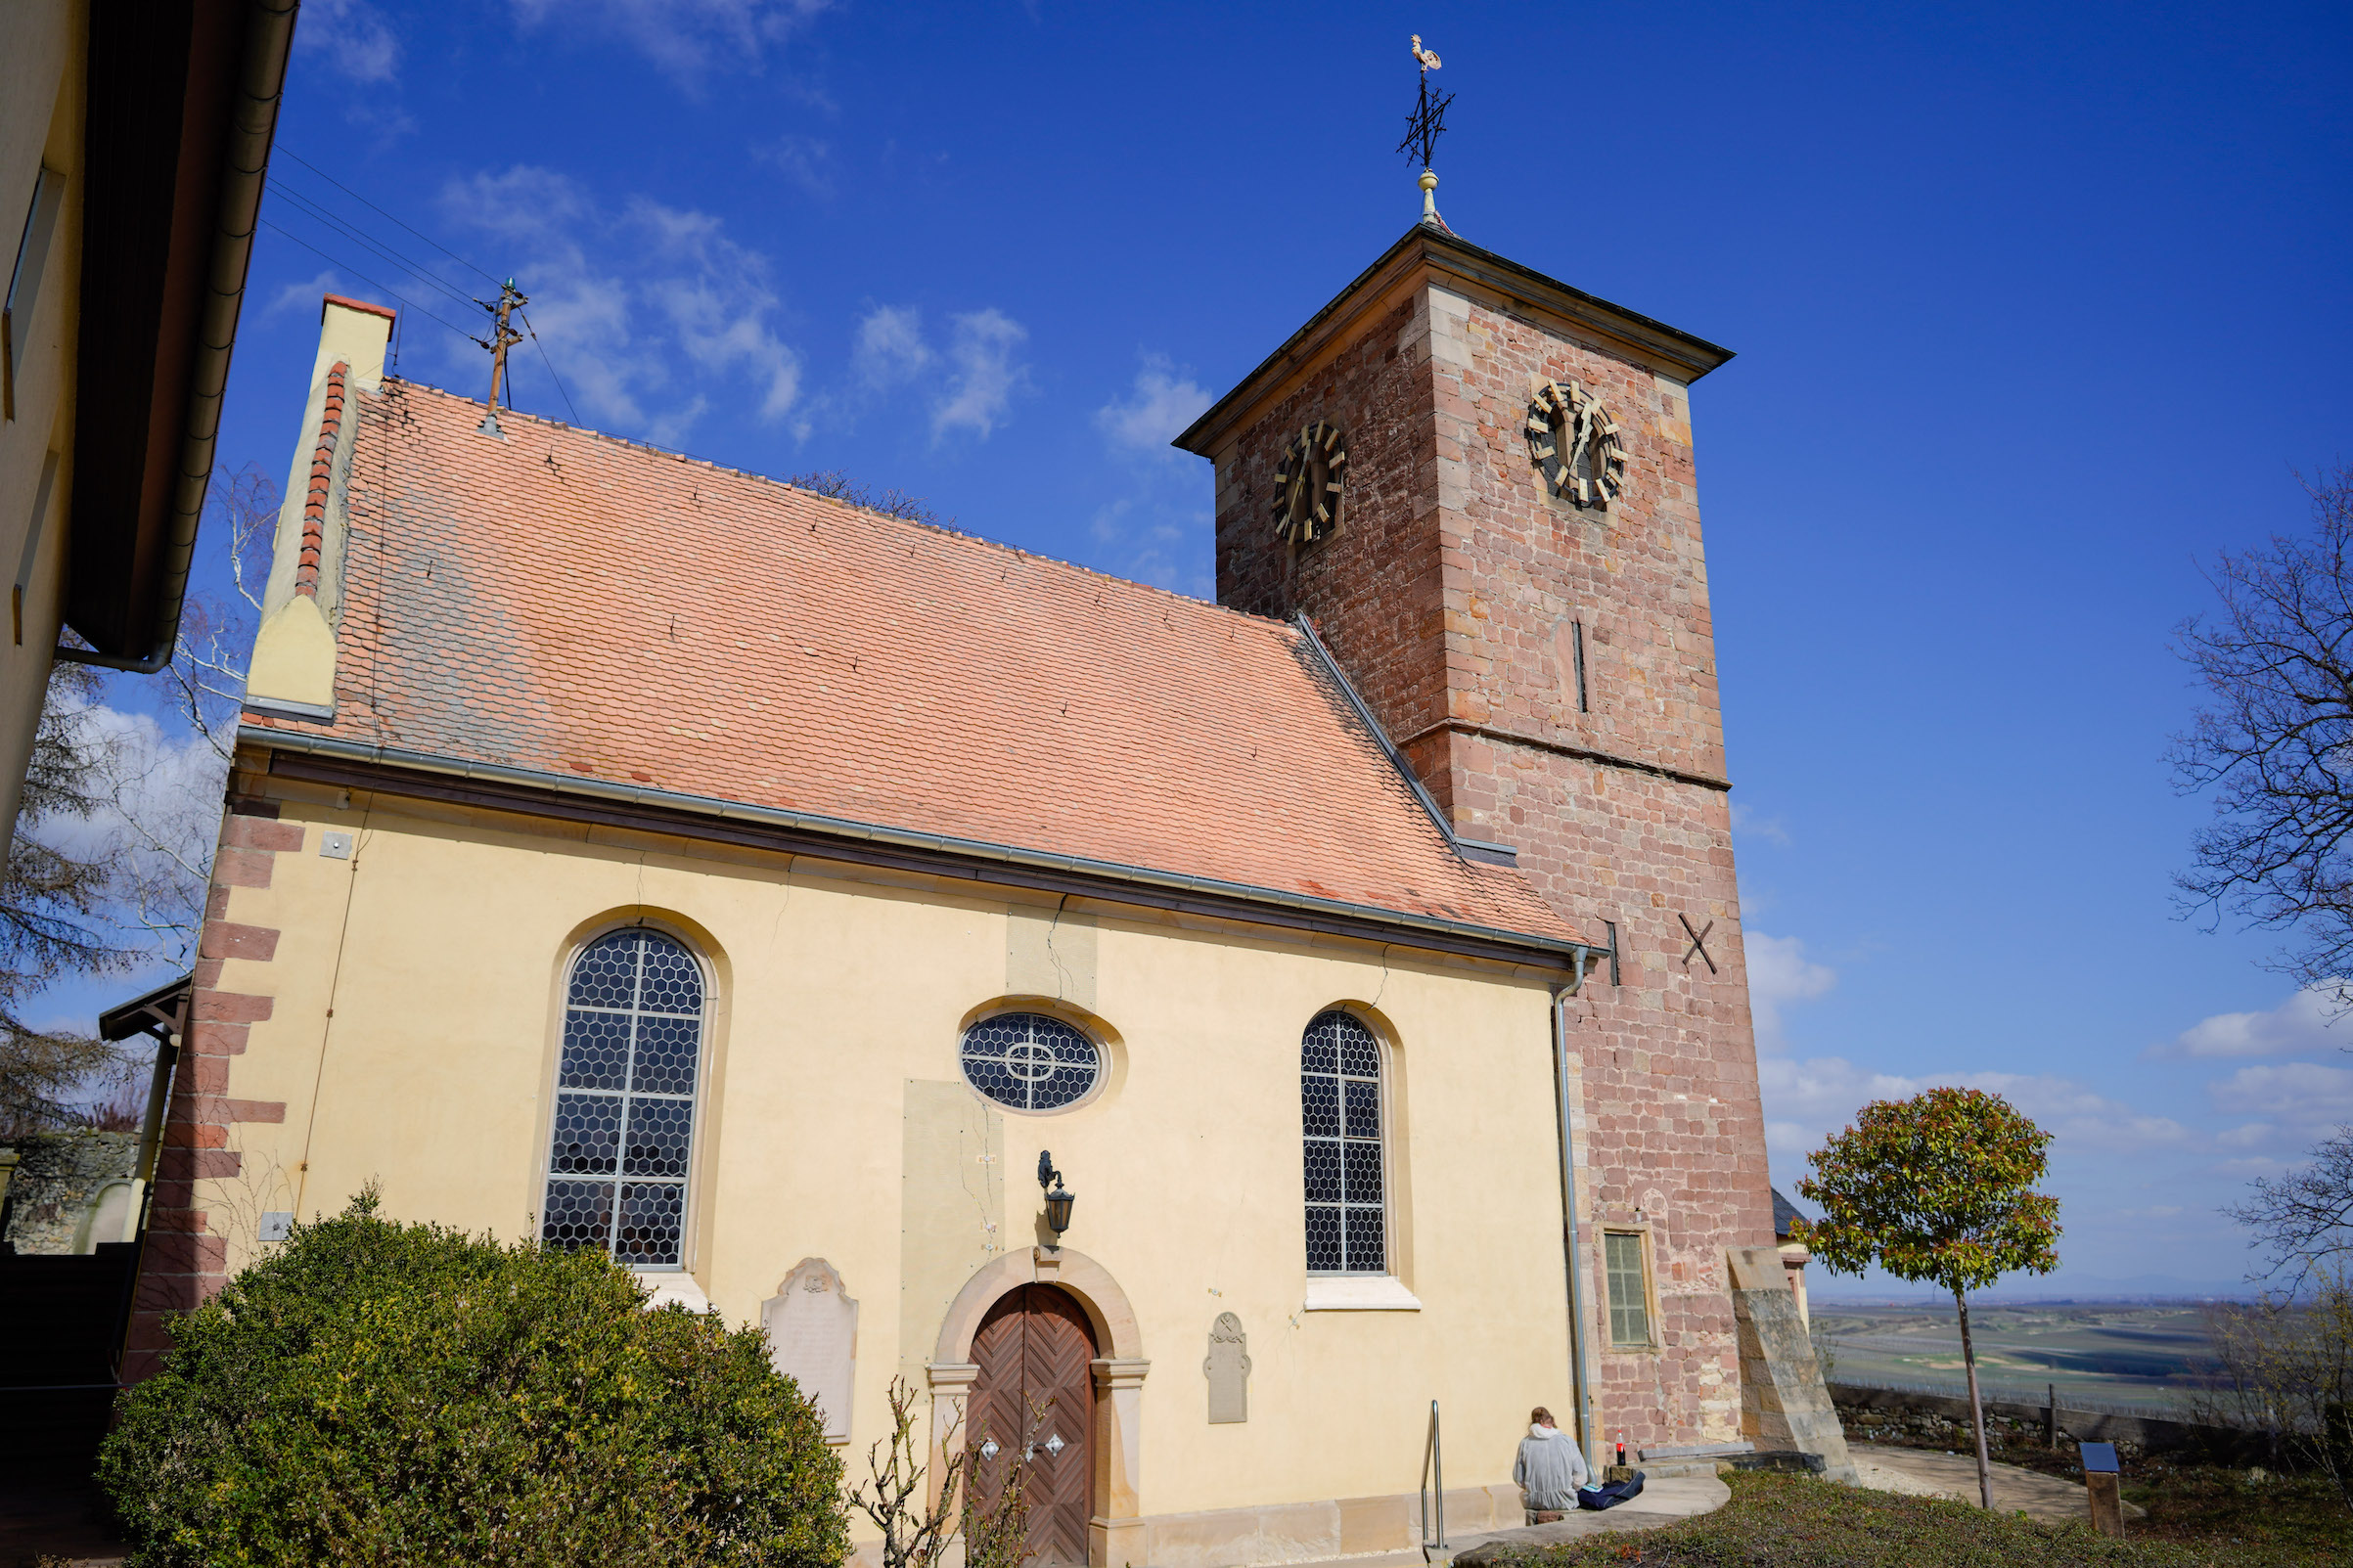 The Protestant Church in Herxheim am Berg, in front of which an information board had recently been erected, on March 19, 2019. The plaque explains how the bell with the inscription "Everything for the Fatherland. Adolf Hitler" had entered the church and that it would remain there as a reminder for the future. (Uwe Anspach/dpa via Getty Image)